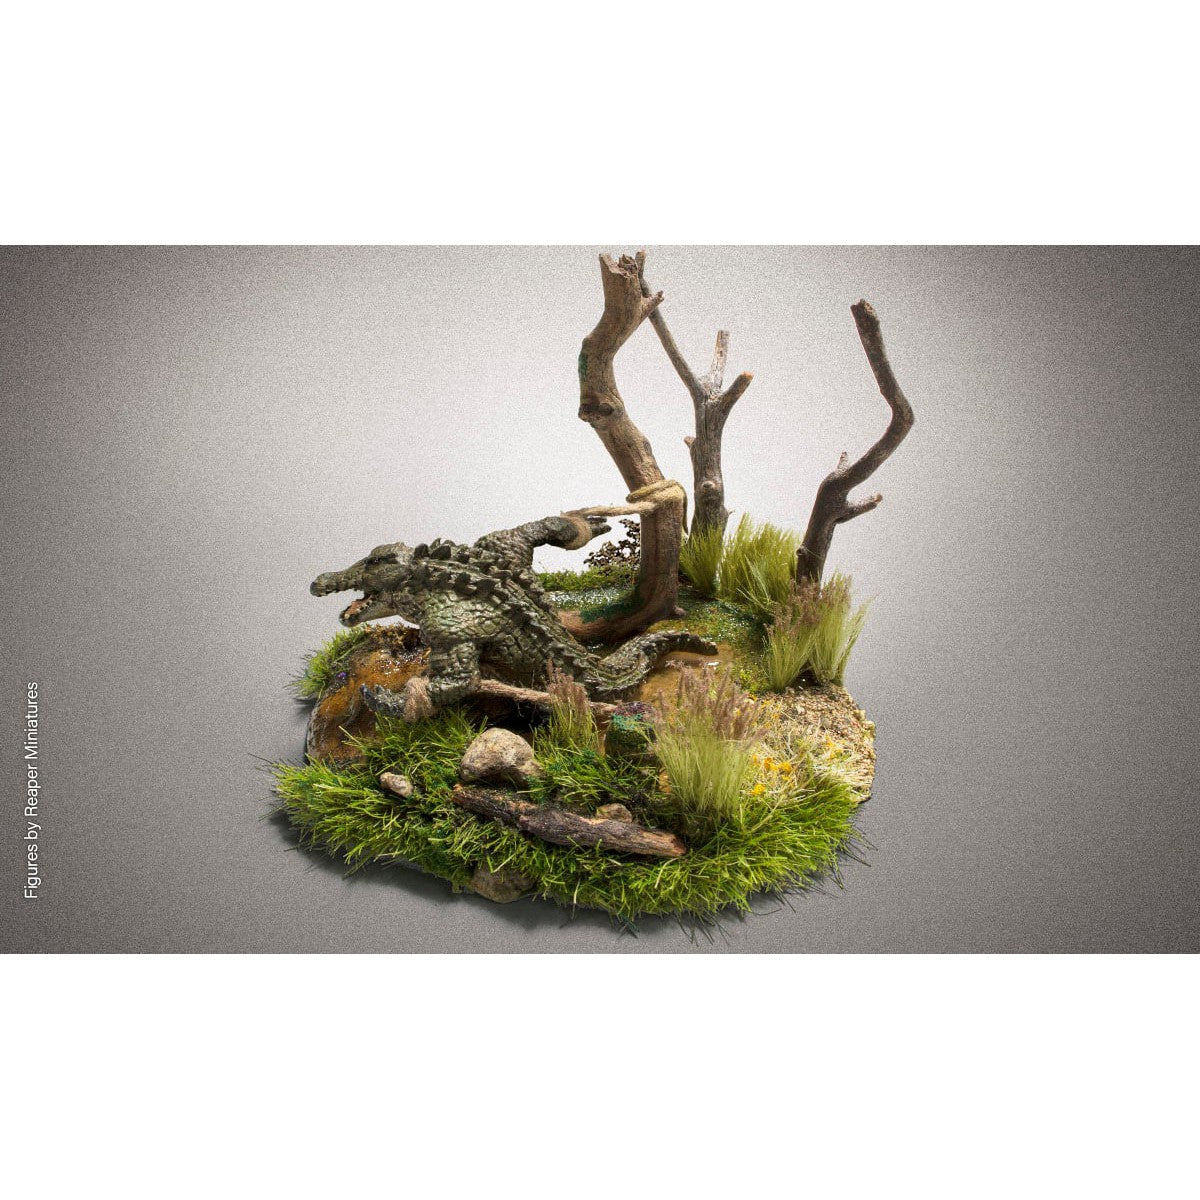 Dark Green Shrubs - Dark Green Shrubs are designed to represent natural, healthy undergrowth often found in wet regions on your terrain feature, miniature base or gaming board